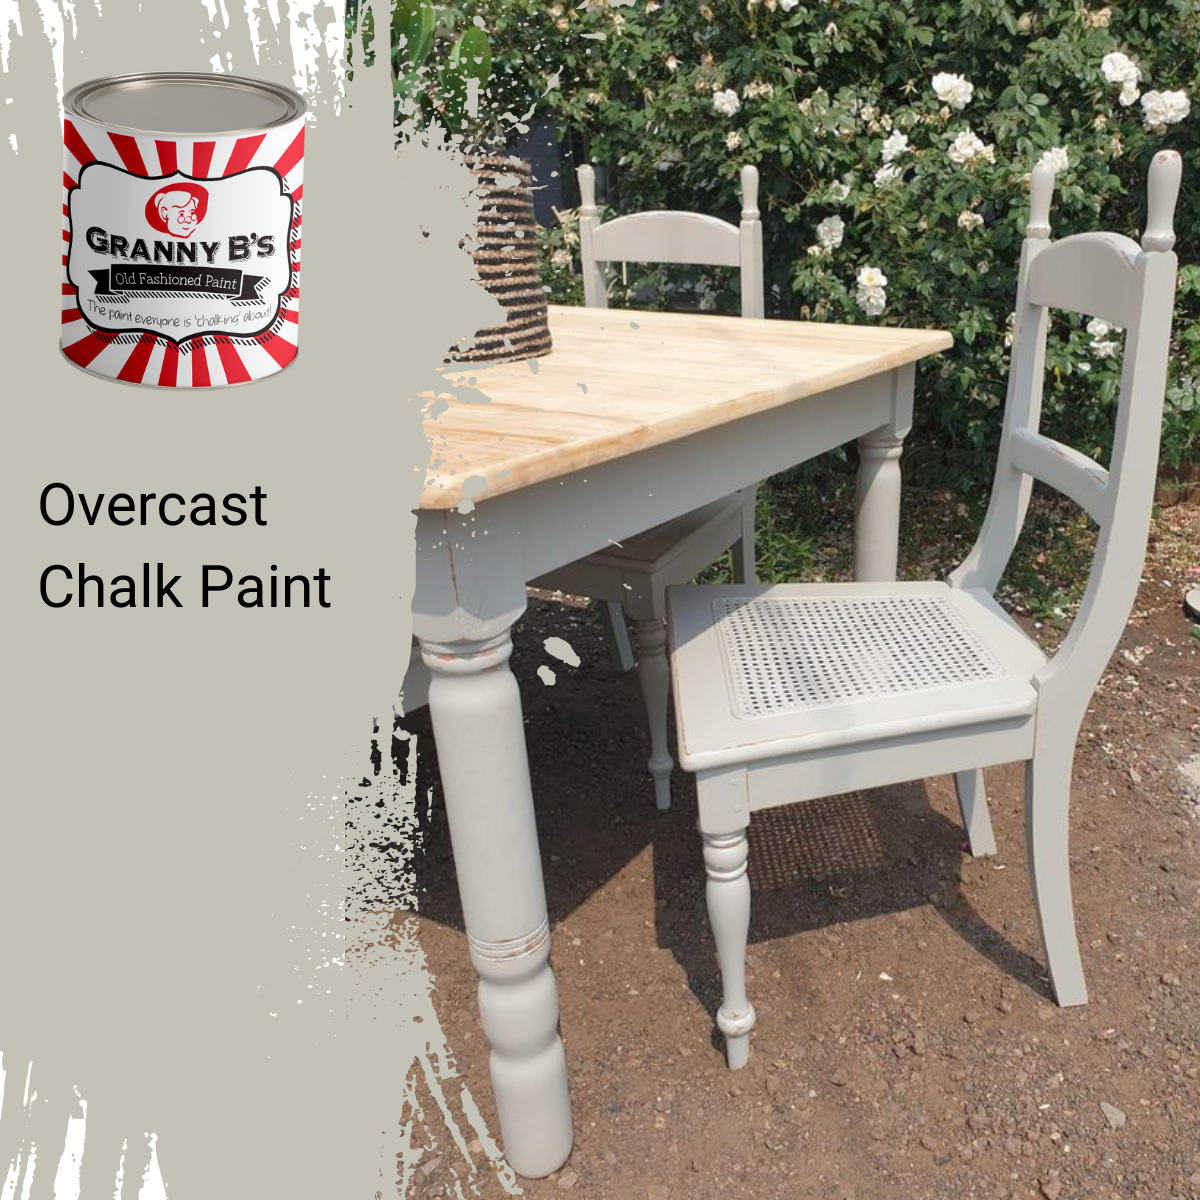 Chalkpaint - Overcast (Mid Grey) - Granny B's Old Fashioned Paint